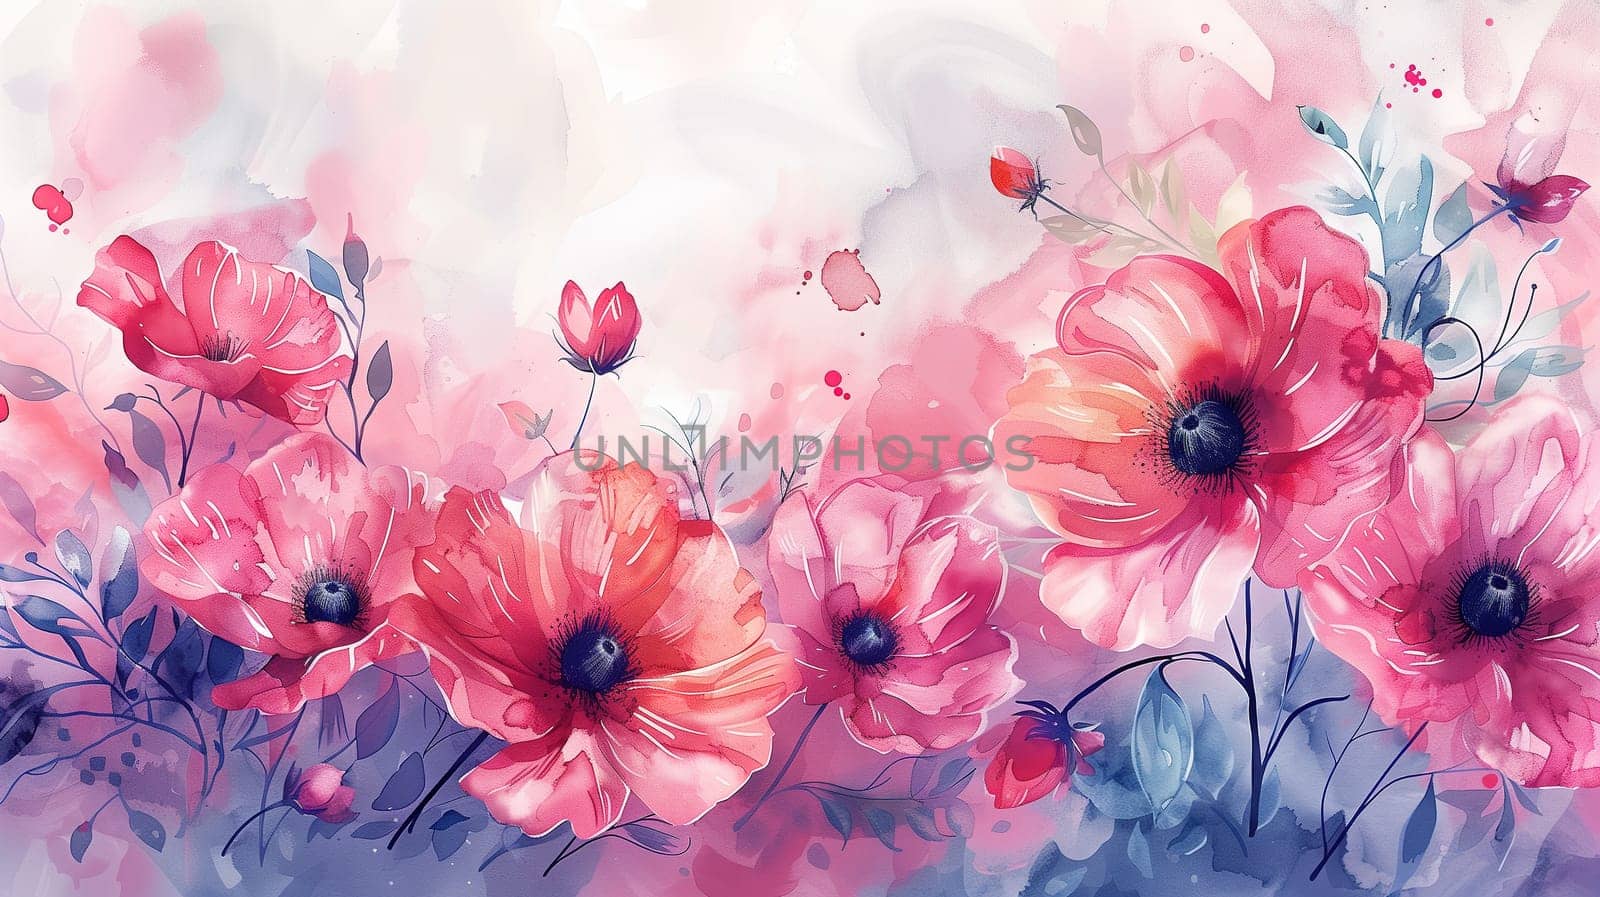 Pink Flowers Painting on White Background by TRMK